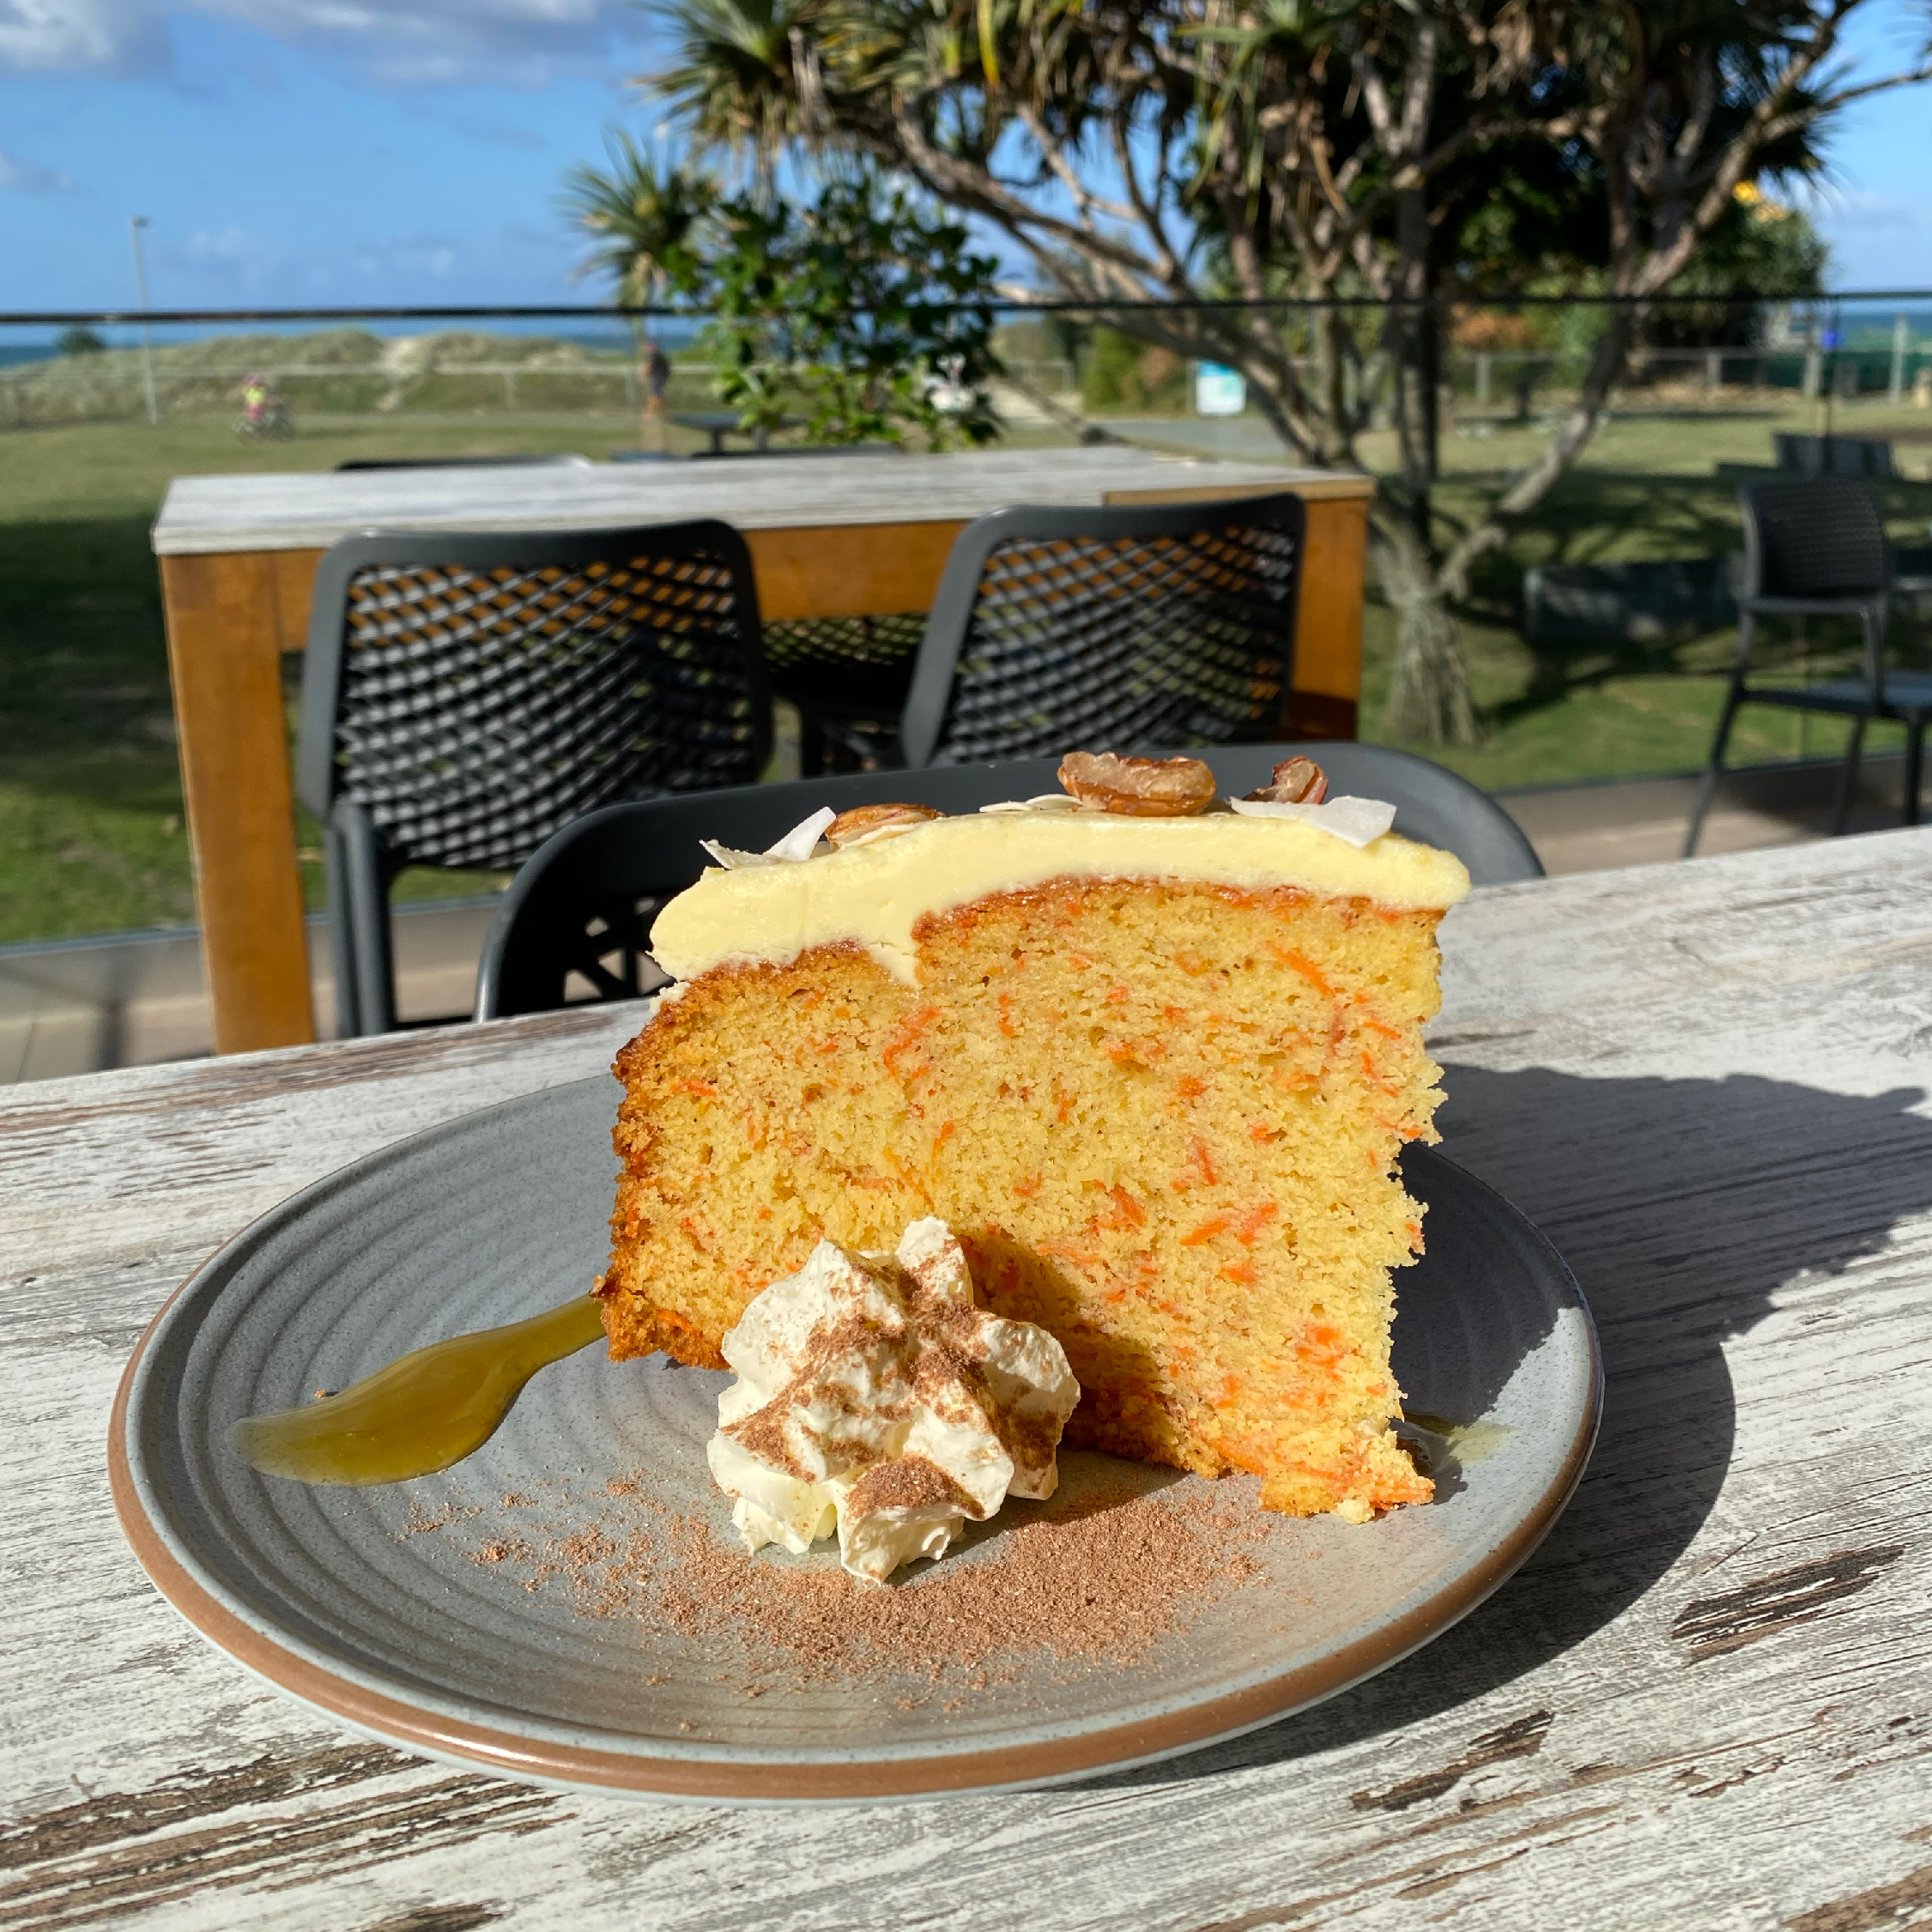 Dessert of the Month: Carrot and Pecan Cake